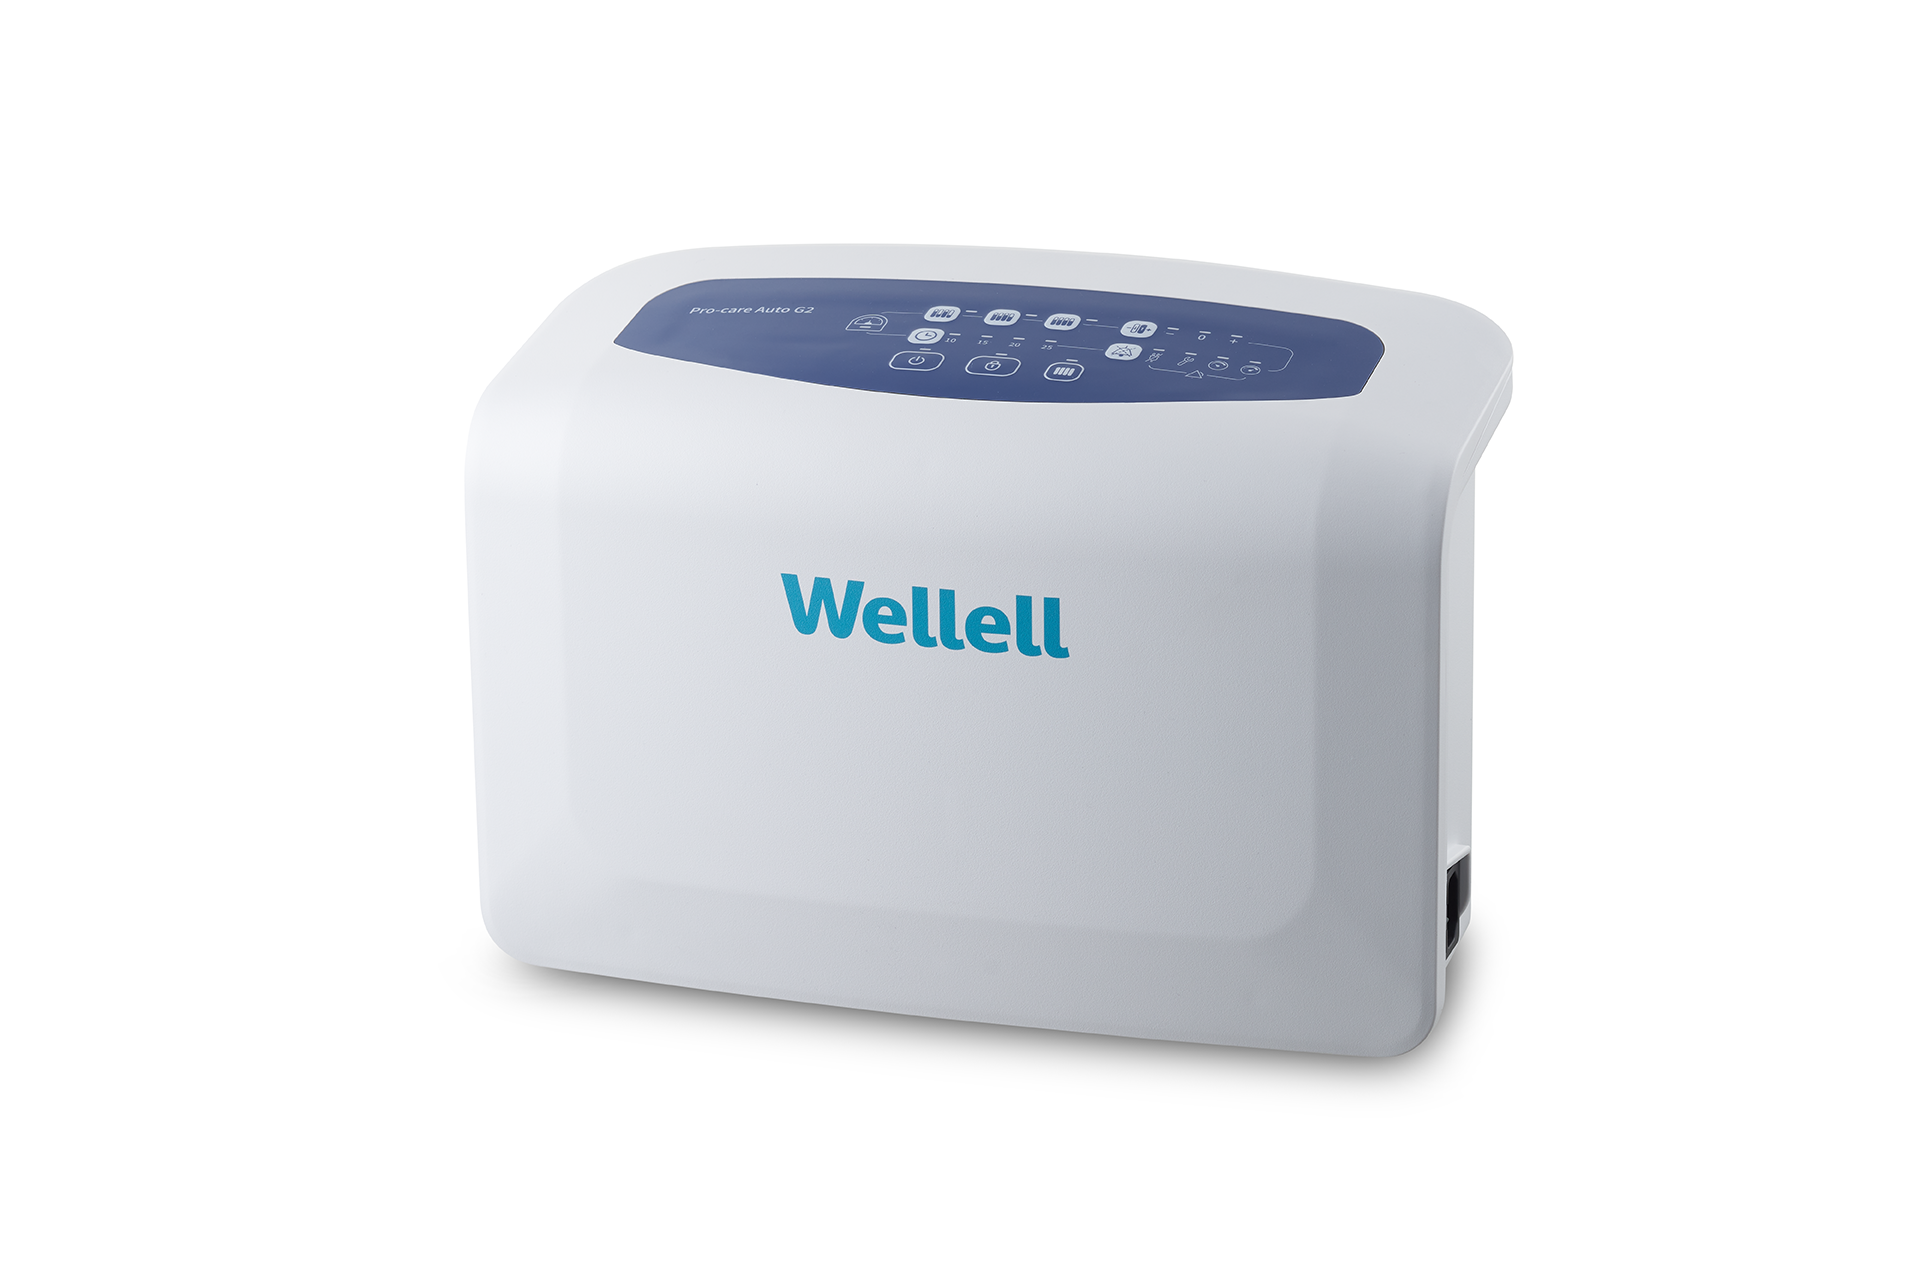 Pro-care Auto - Intuitive LCD pump interface gives easy access to control pressure settings, times, and alarms -Wellell